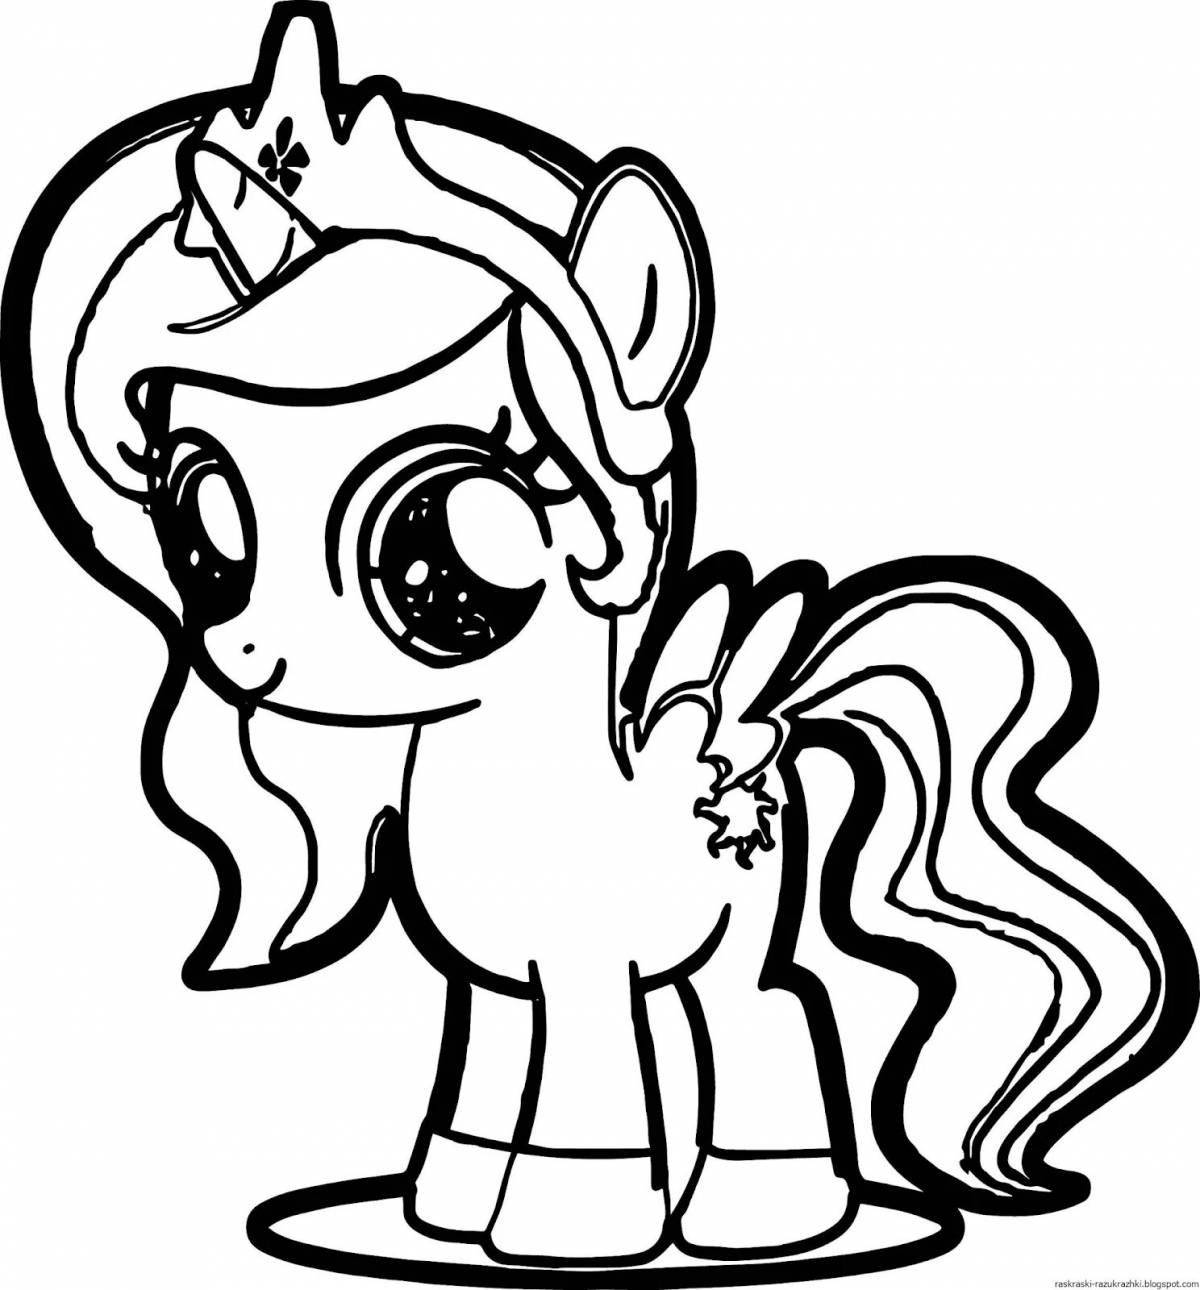 Gorgeous little pony coloring game